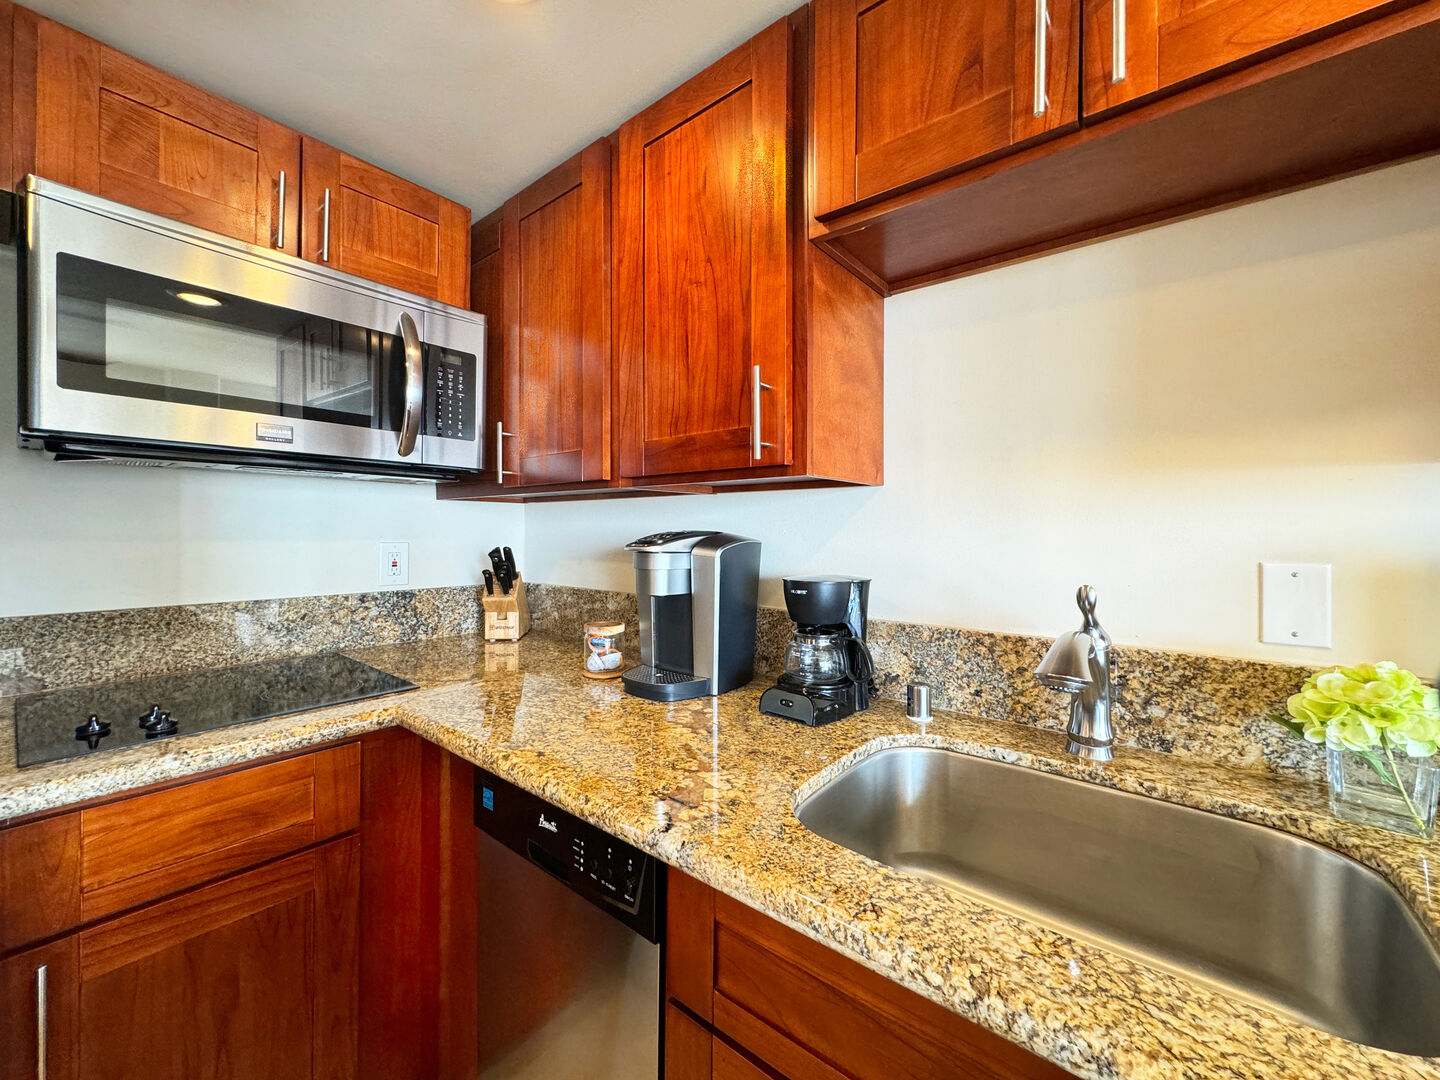 Fully equipped kitchen perfect for culinary needs.